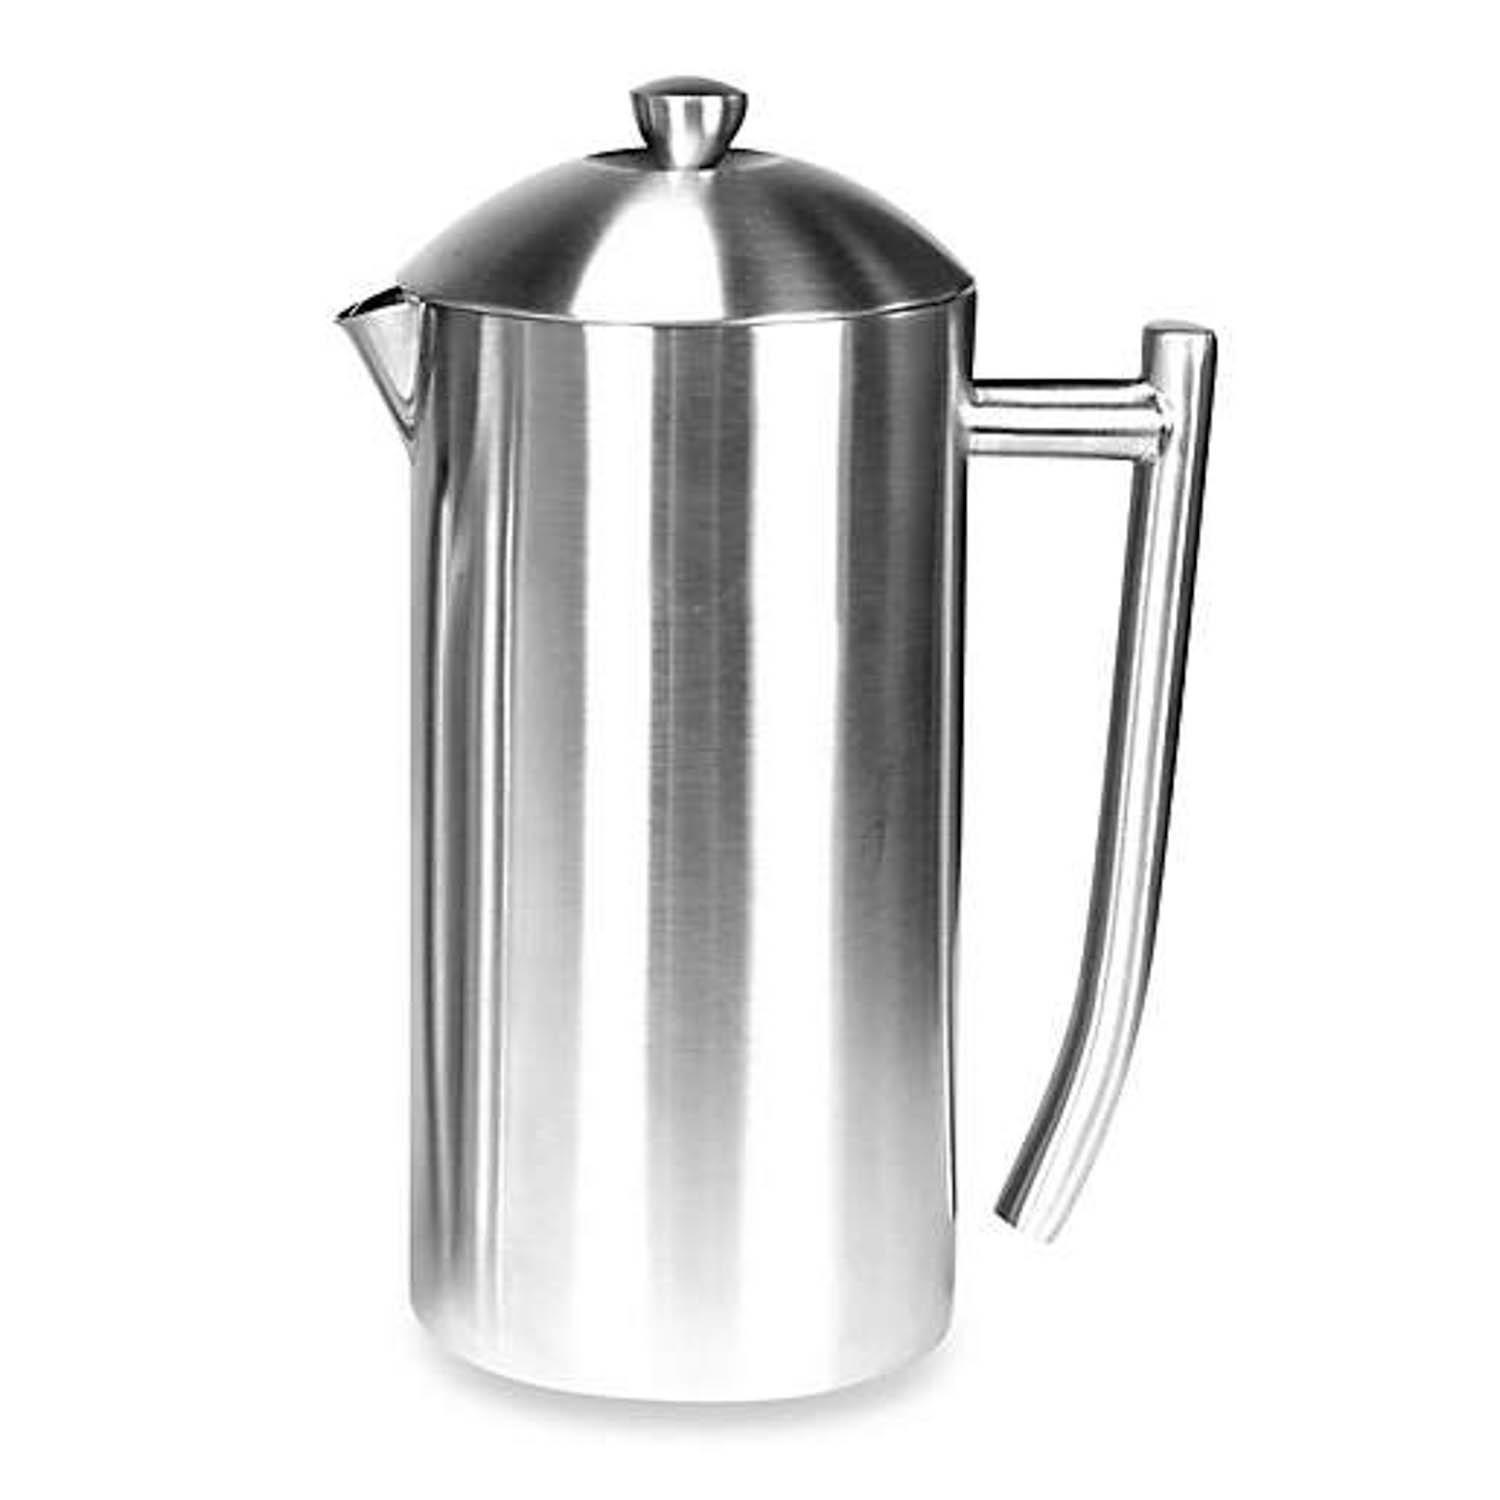 McLemore Auction Company - Auction: Home Decor, Bedding, Baby Items Frieling 17 Oz. Insulated Stainless Steel French Press